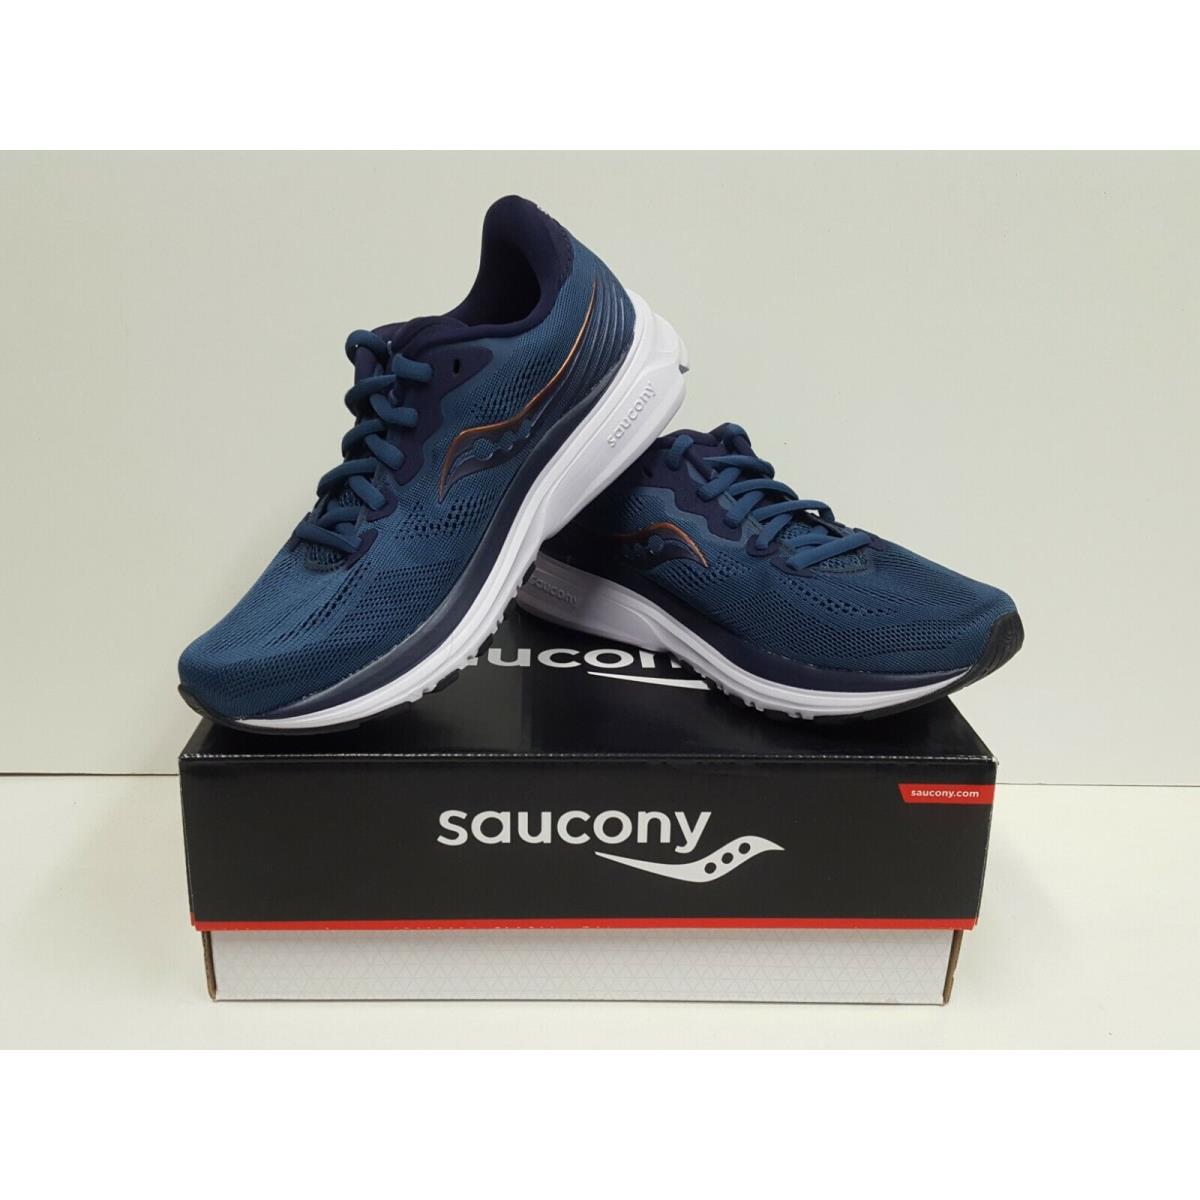 Saucony Womens Ride 14 Running Shoes Trainers Sneakers Black Sports Breathable